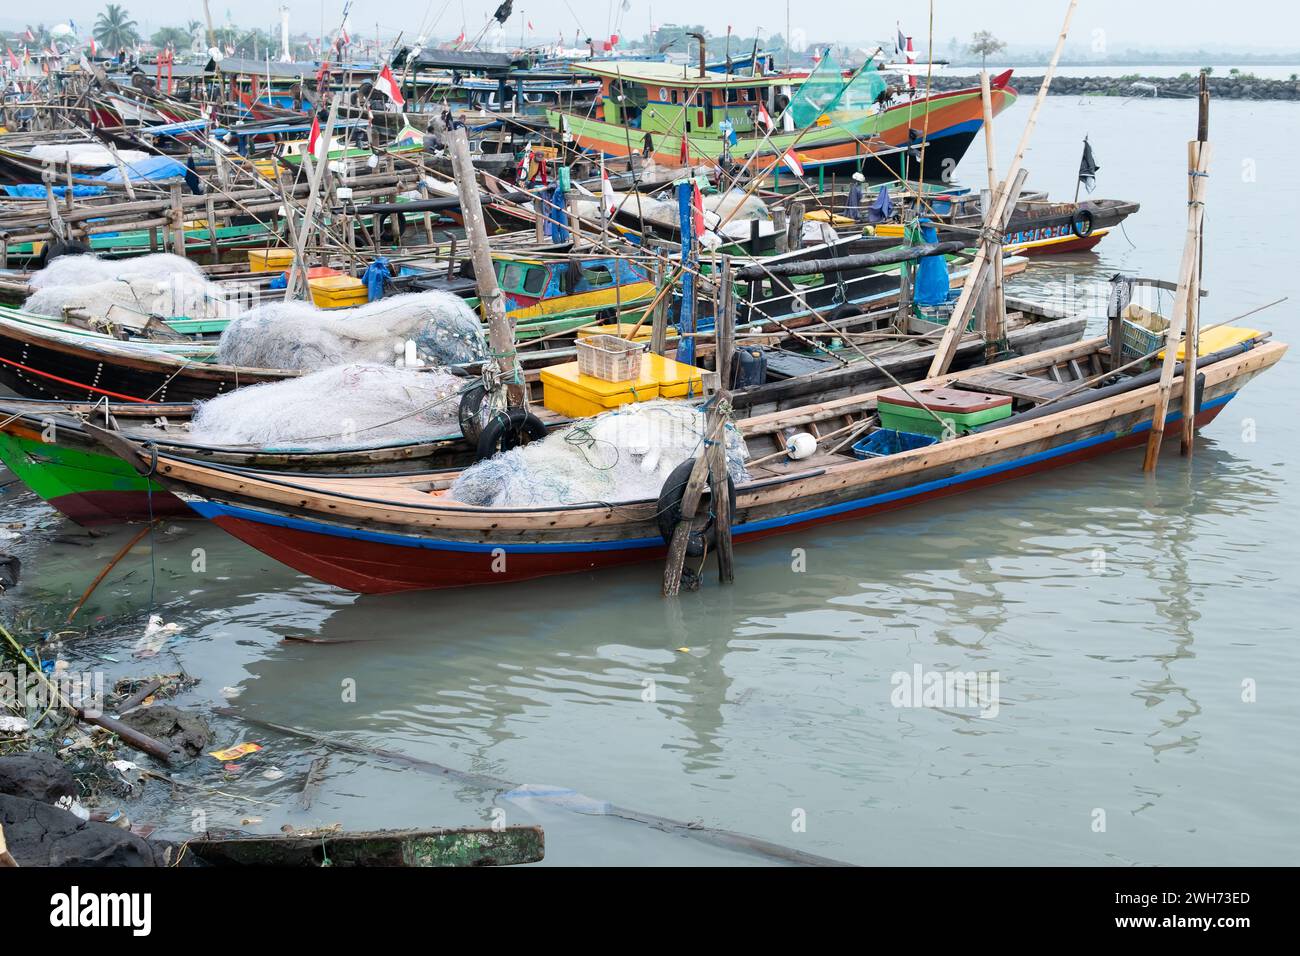 Rows of fishing net boats parked at a fish auction in Indonesia Stock Photo